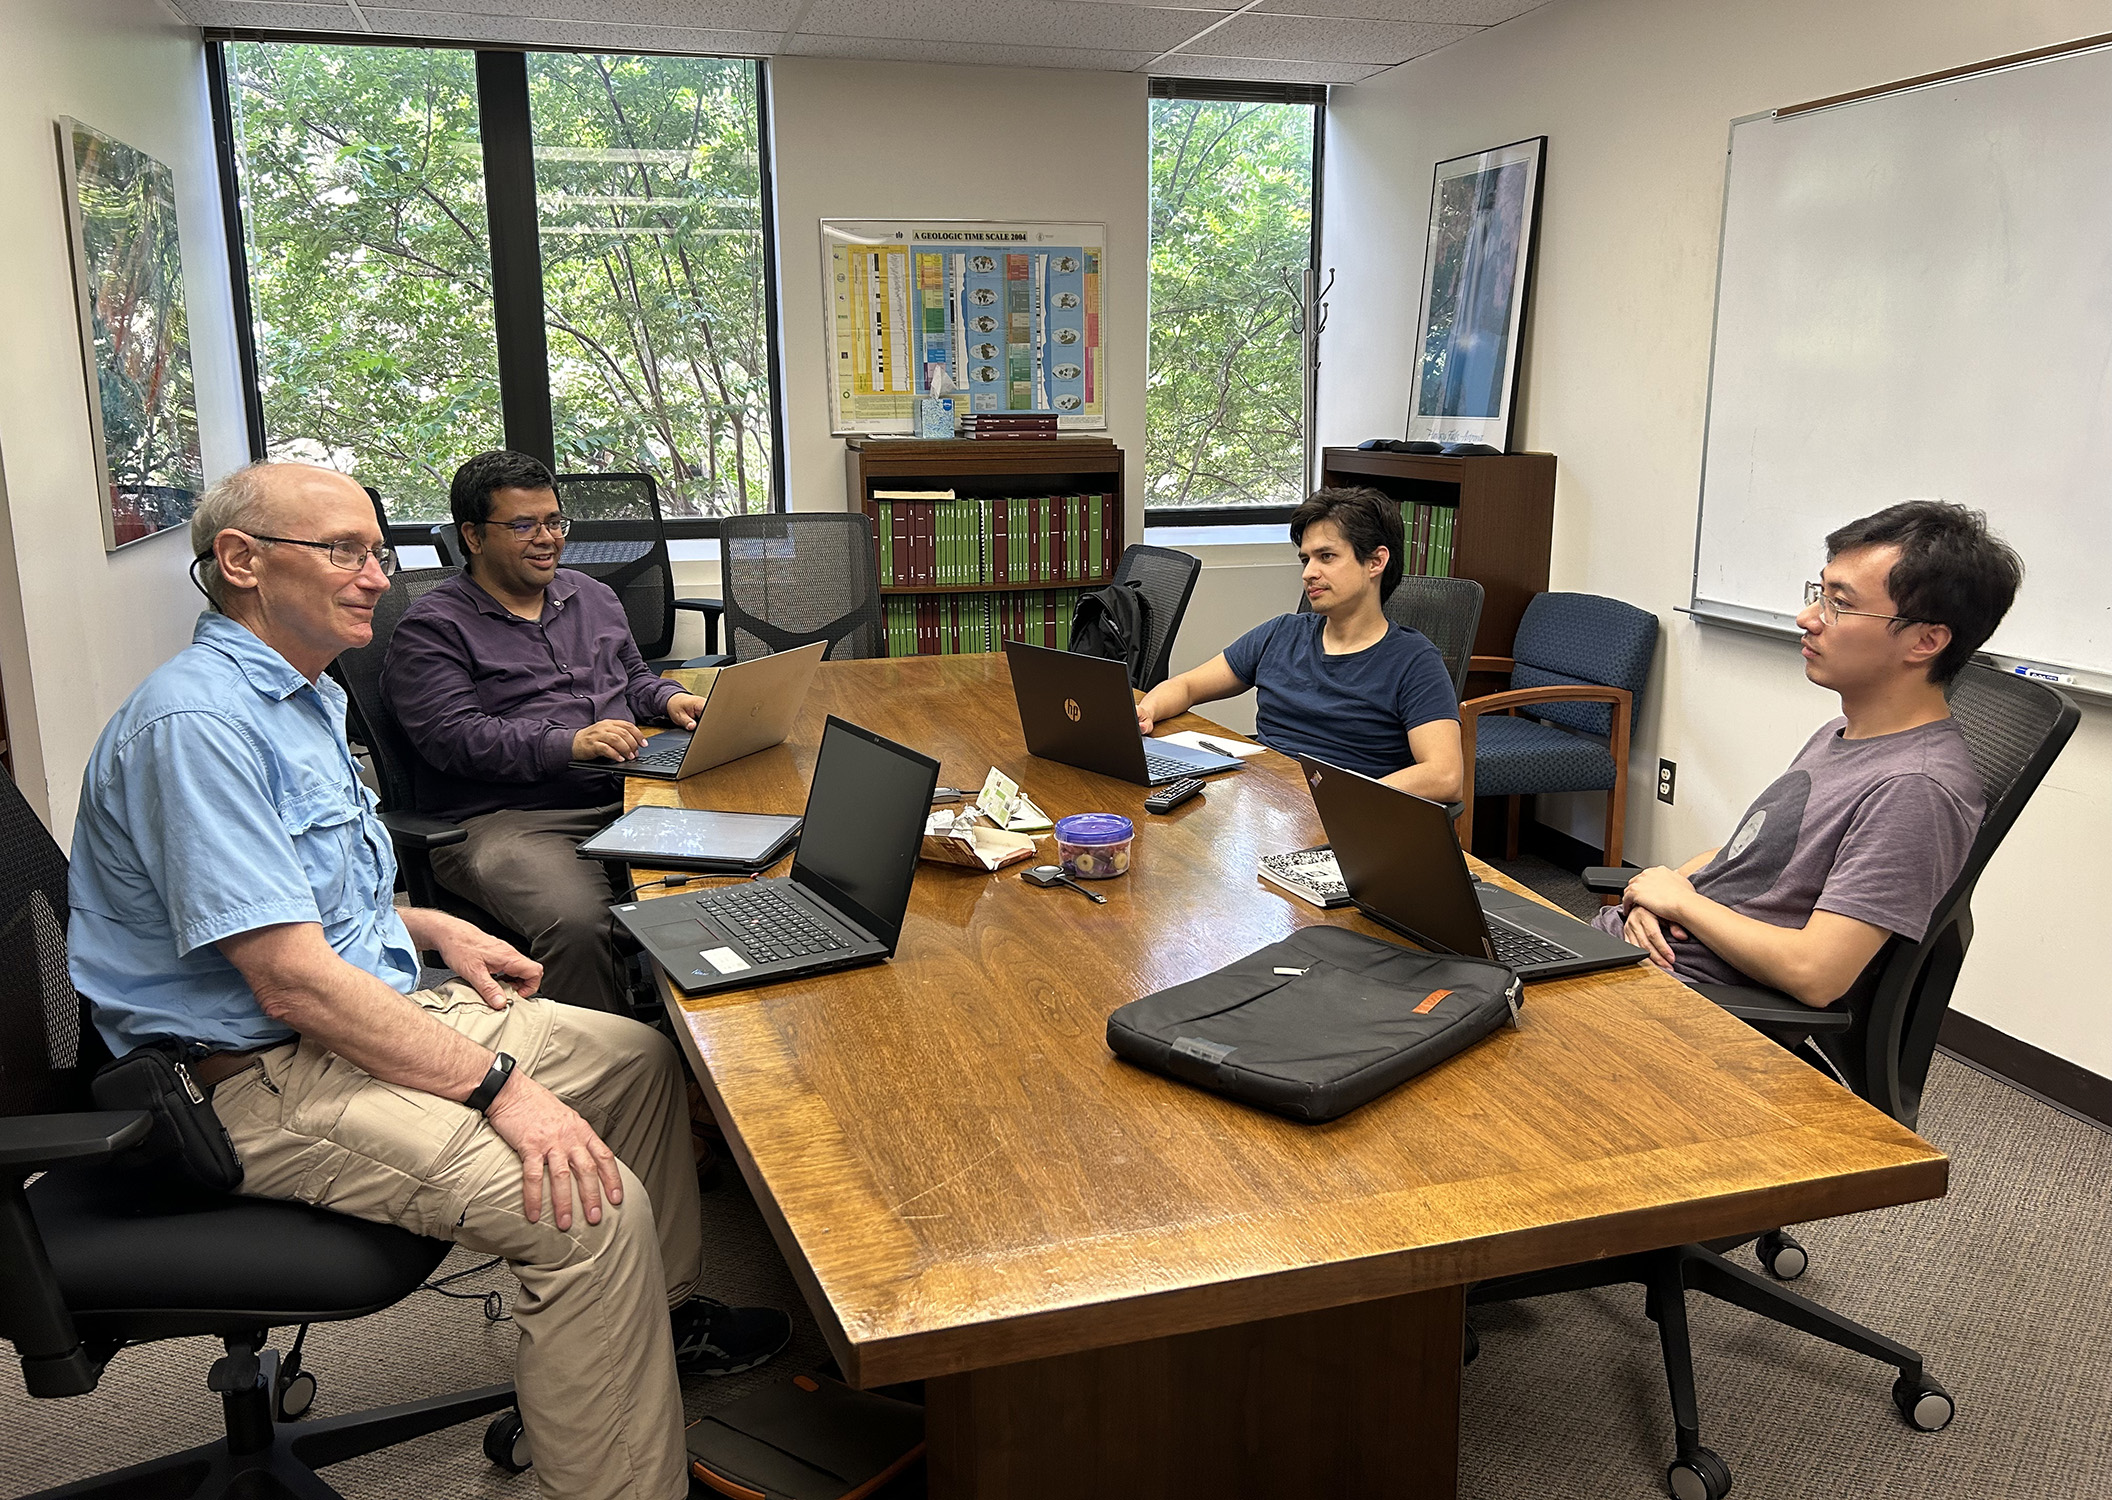 Texas A&amp;M scientists Dr. Ethan Grossman, Dr. Sarbajit Banerjee, Dr. Saul Perez-Beltran and Zeyang Sun sit at a conference table, discussing next steps in their research